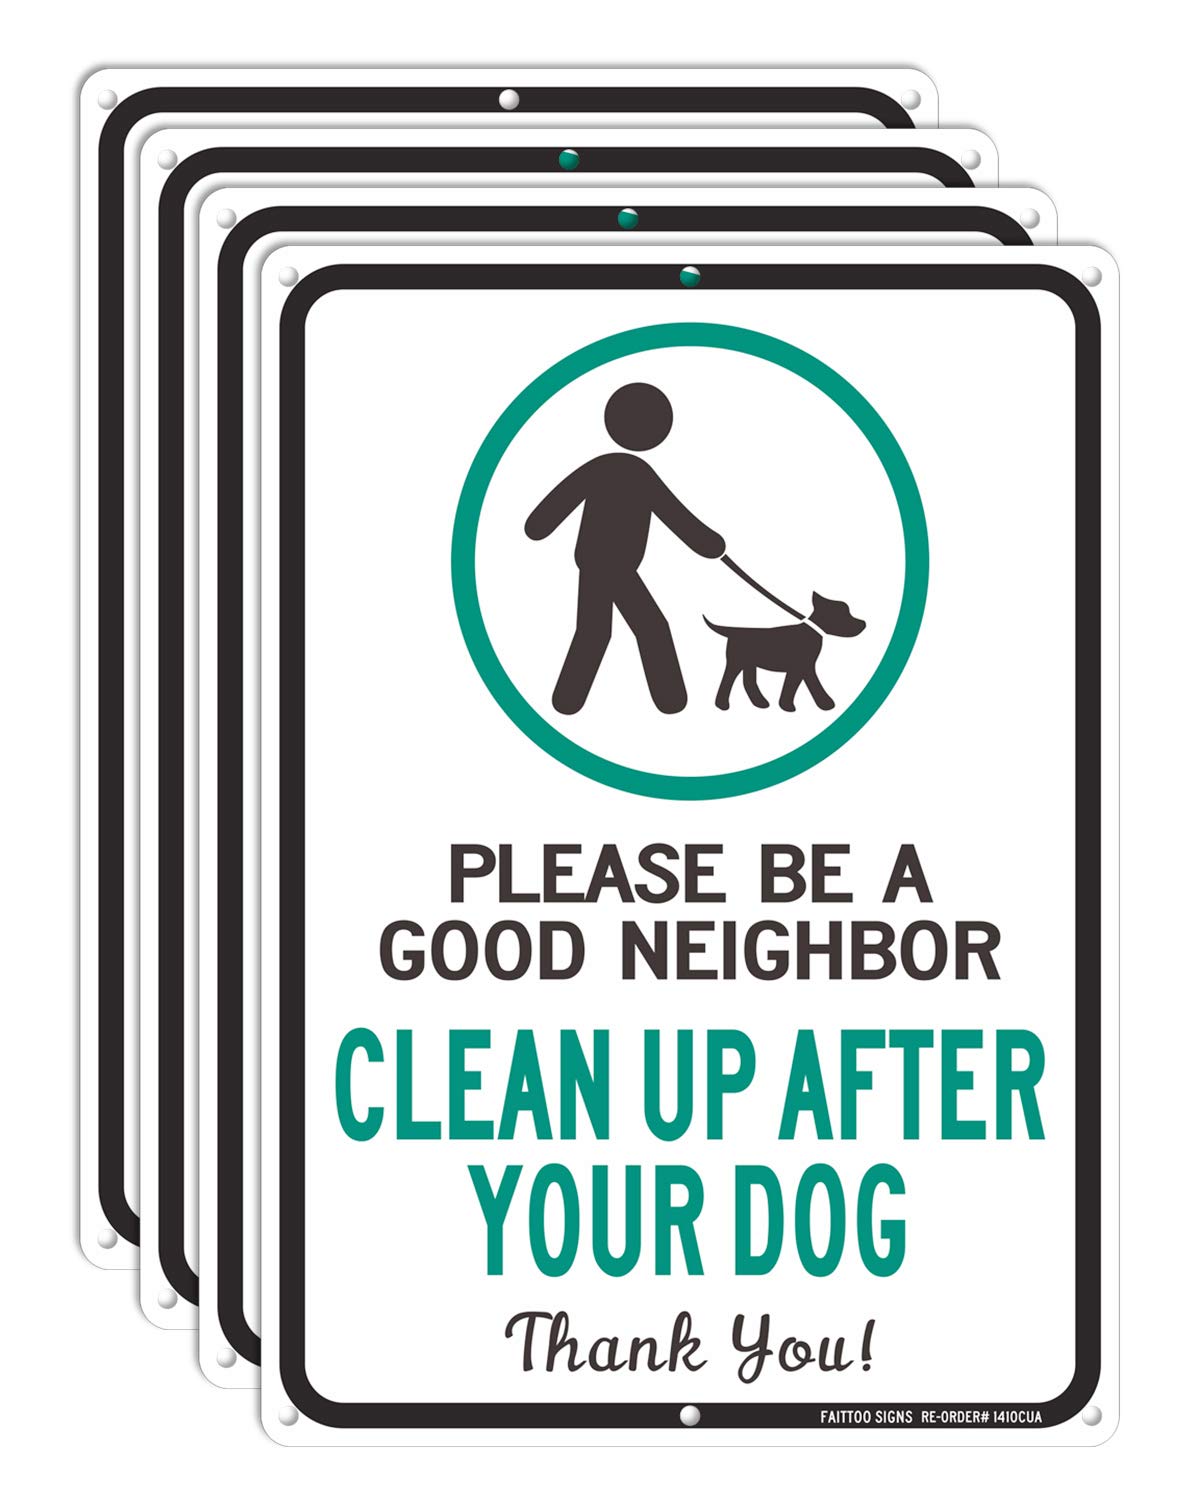 Clean Up After Your Dog Sign 4 Pack, Please Be a Good Neighbor, Clean Up After Your Pets, Be a Good Neighbor Sign, 14x10 Rust Free .40 Aluminum UV Printed, Easy to Mount Weather Resistant, Non-fading